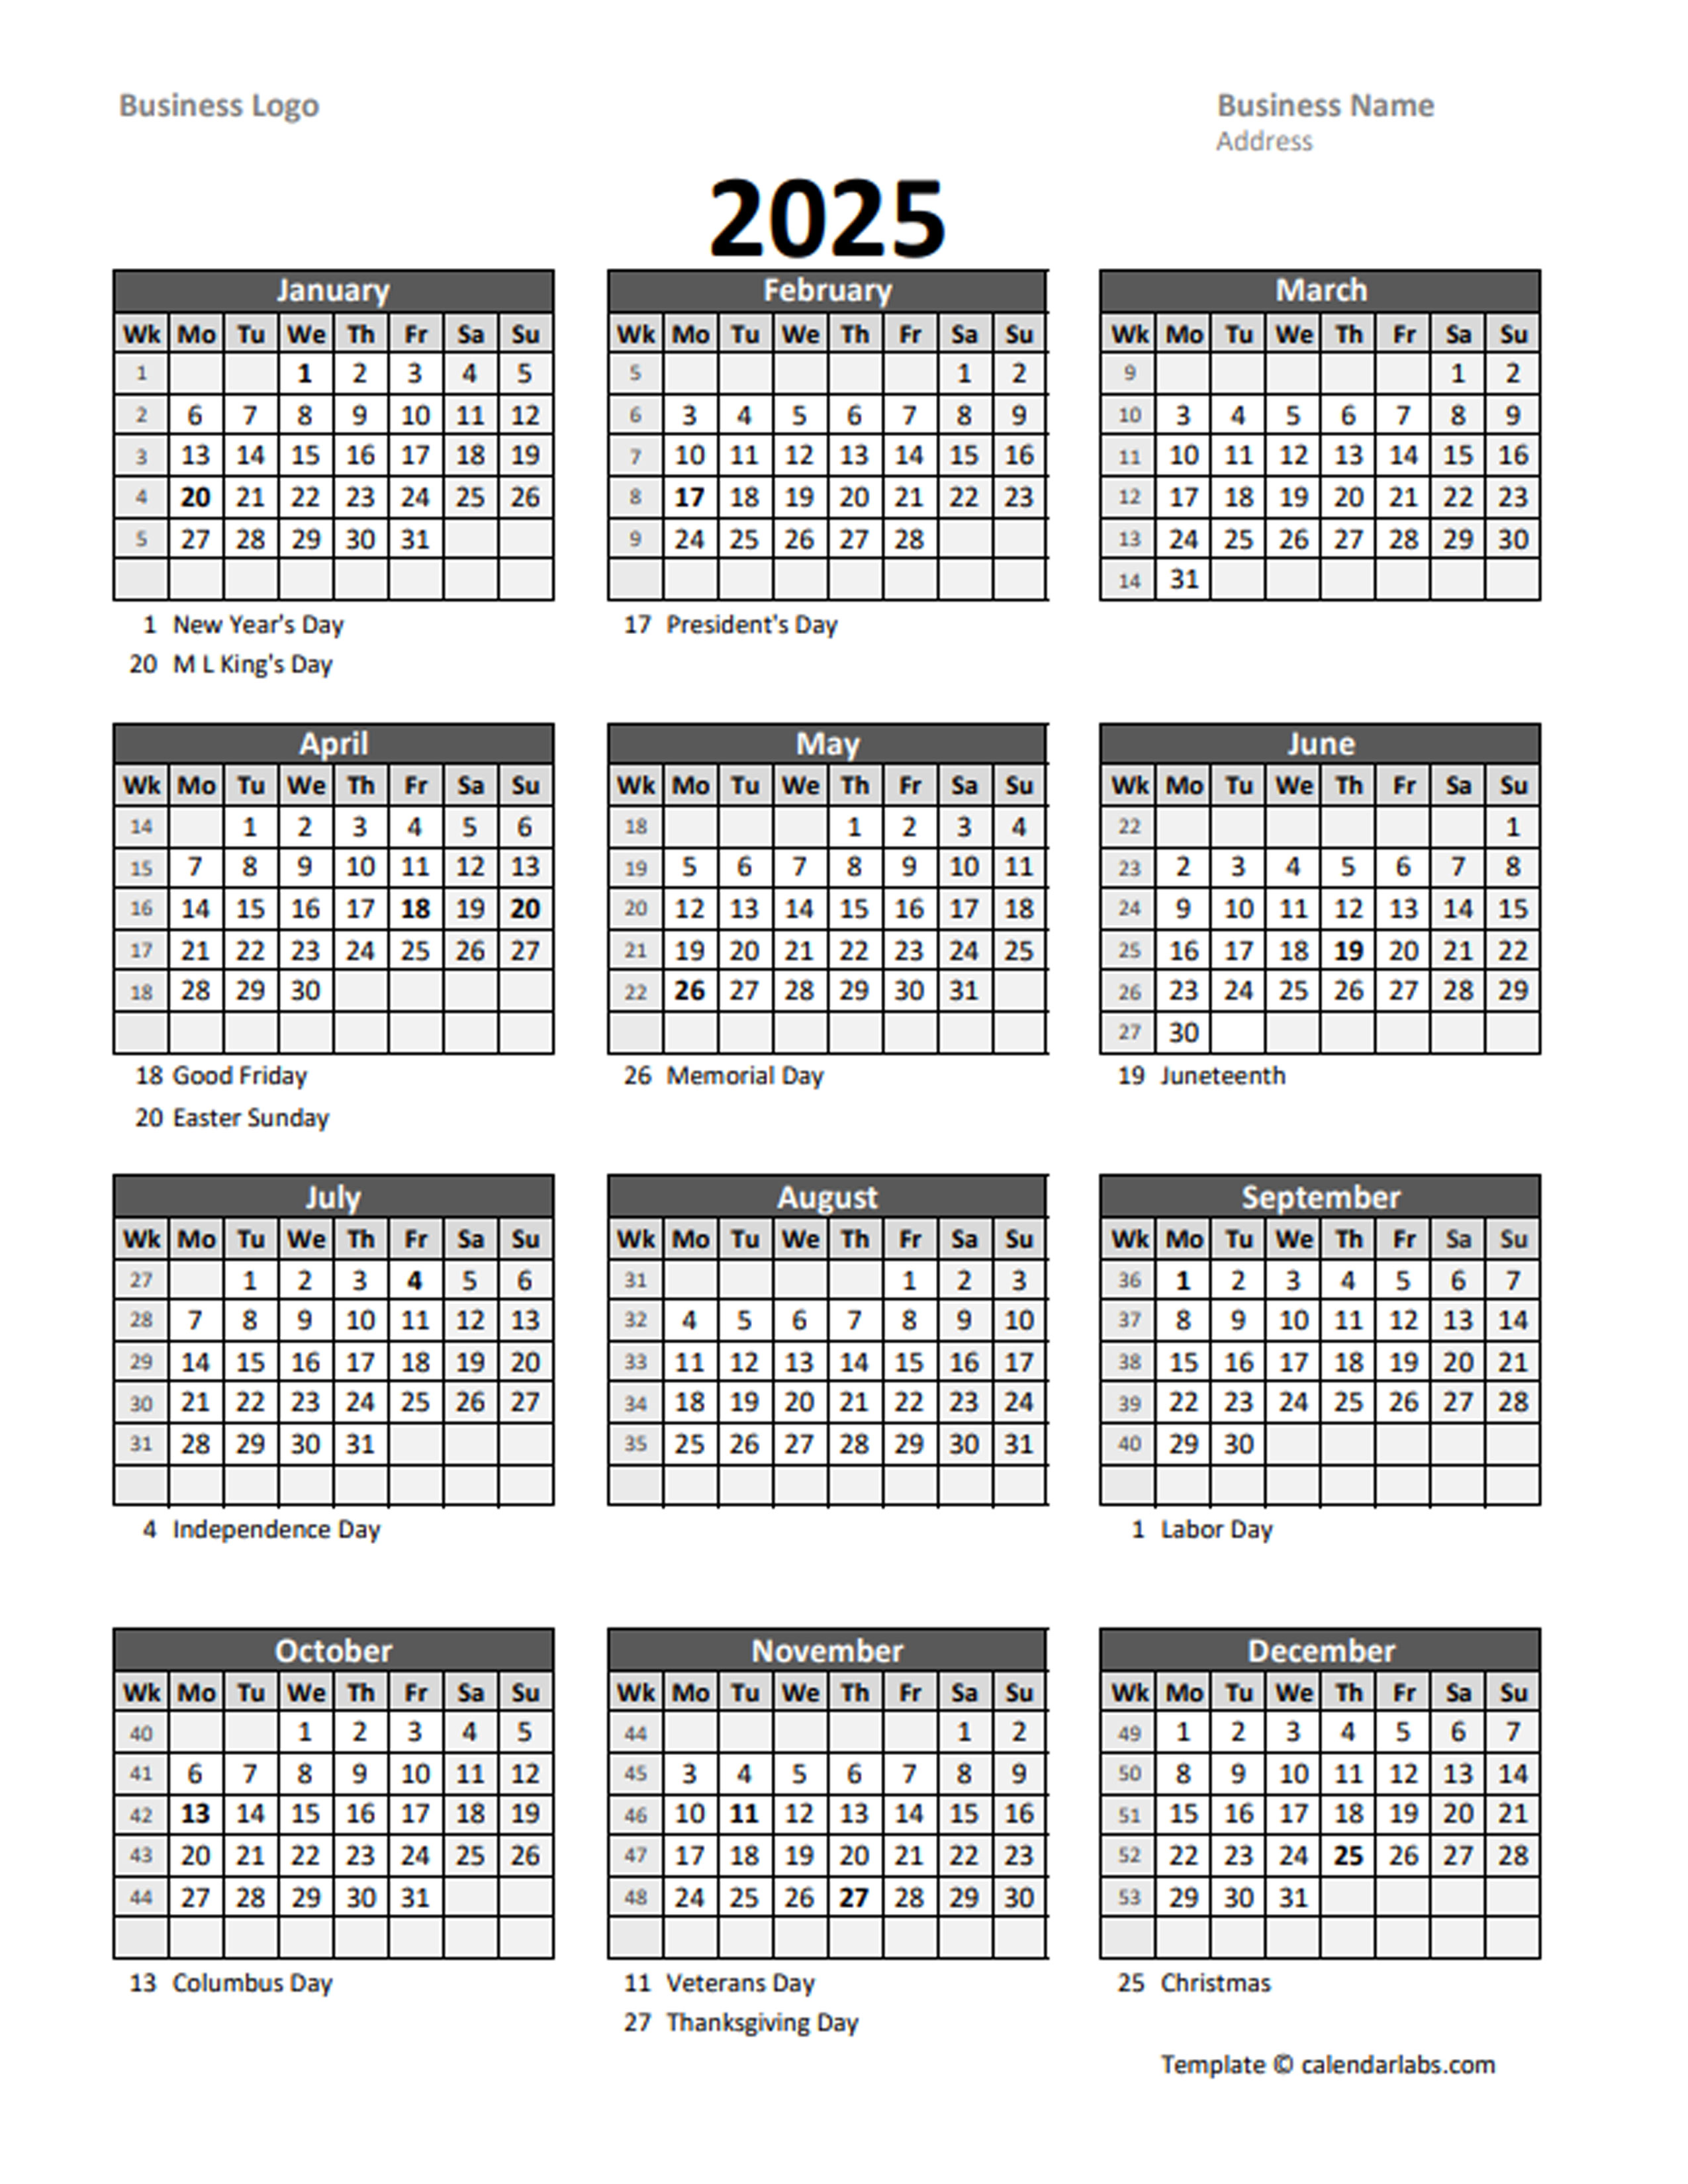 2025-yearly-business-calendar-with-week-number-free-printable-templates